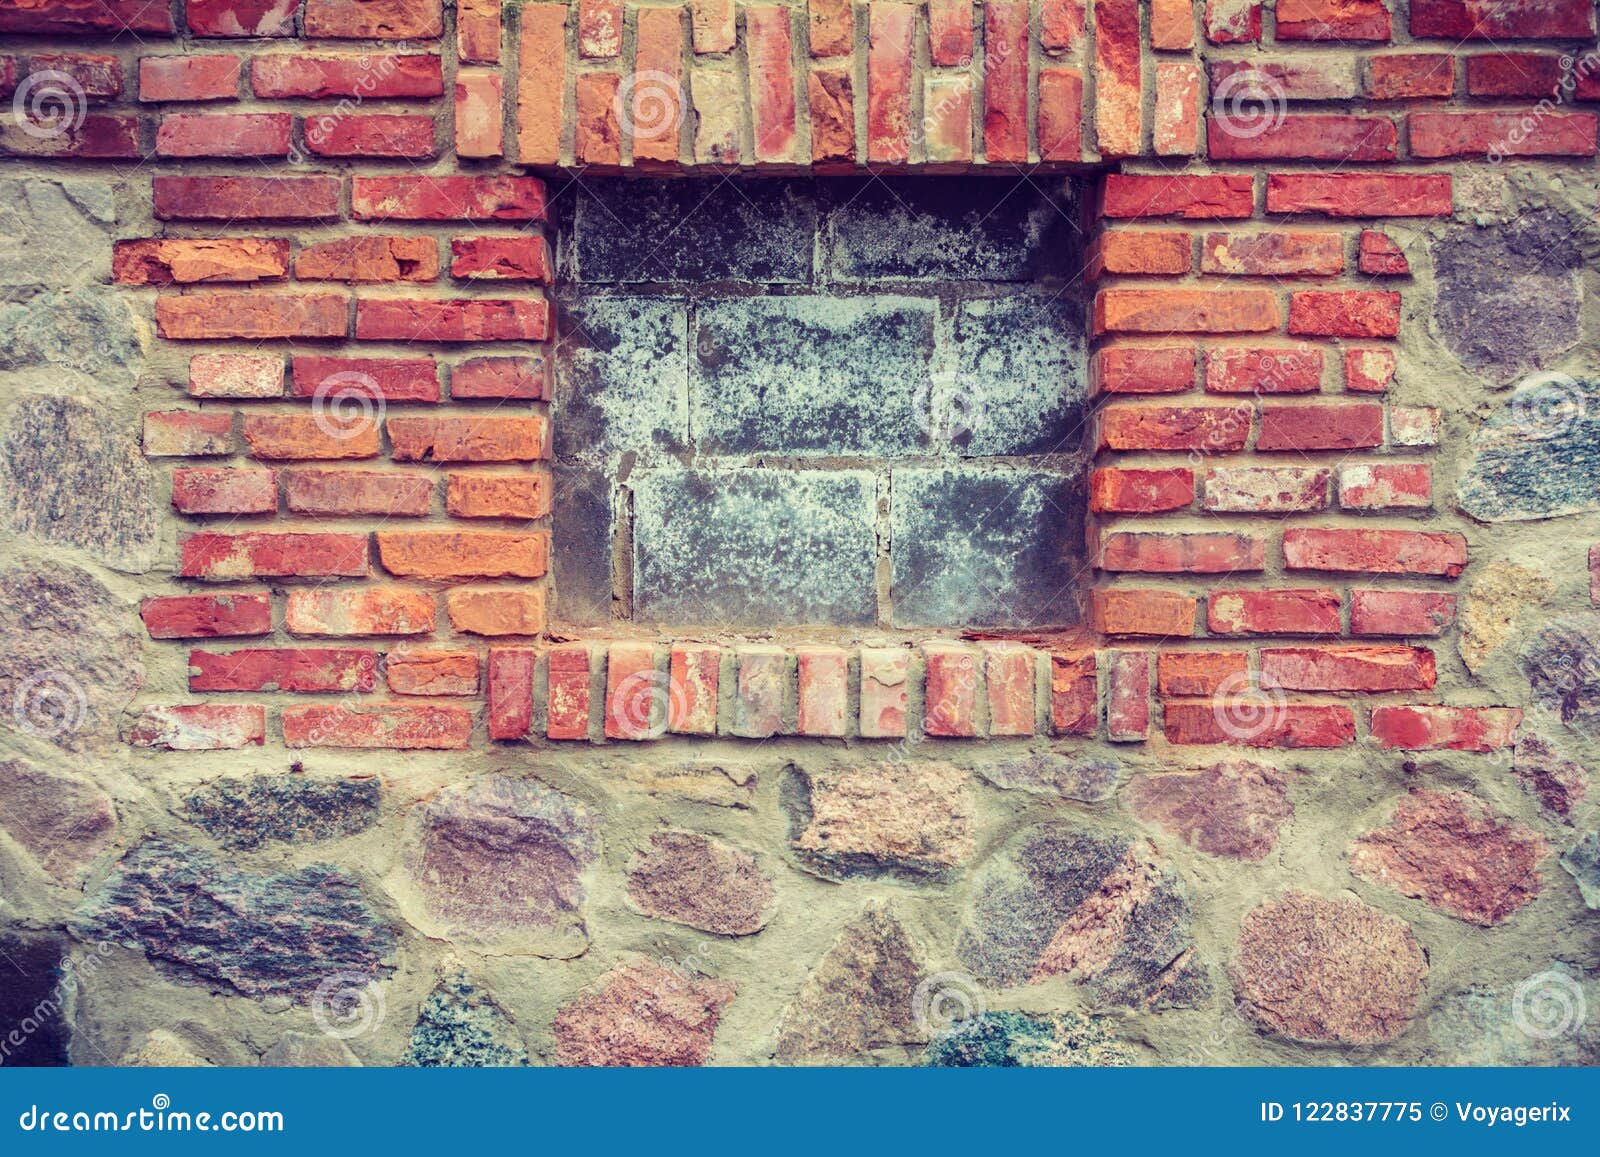 Red Brick Wall With Wooden Pieces Stock Image - Image of board, texture ...